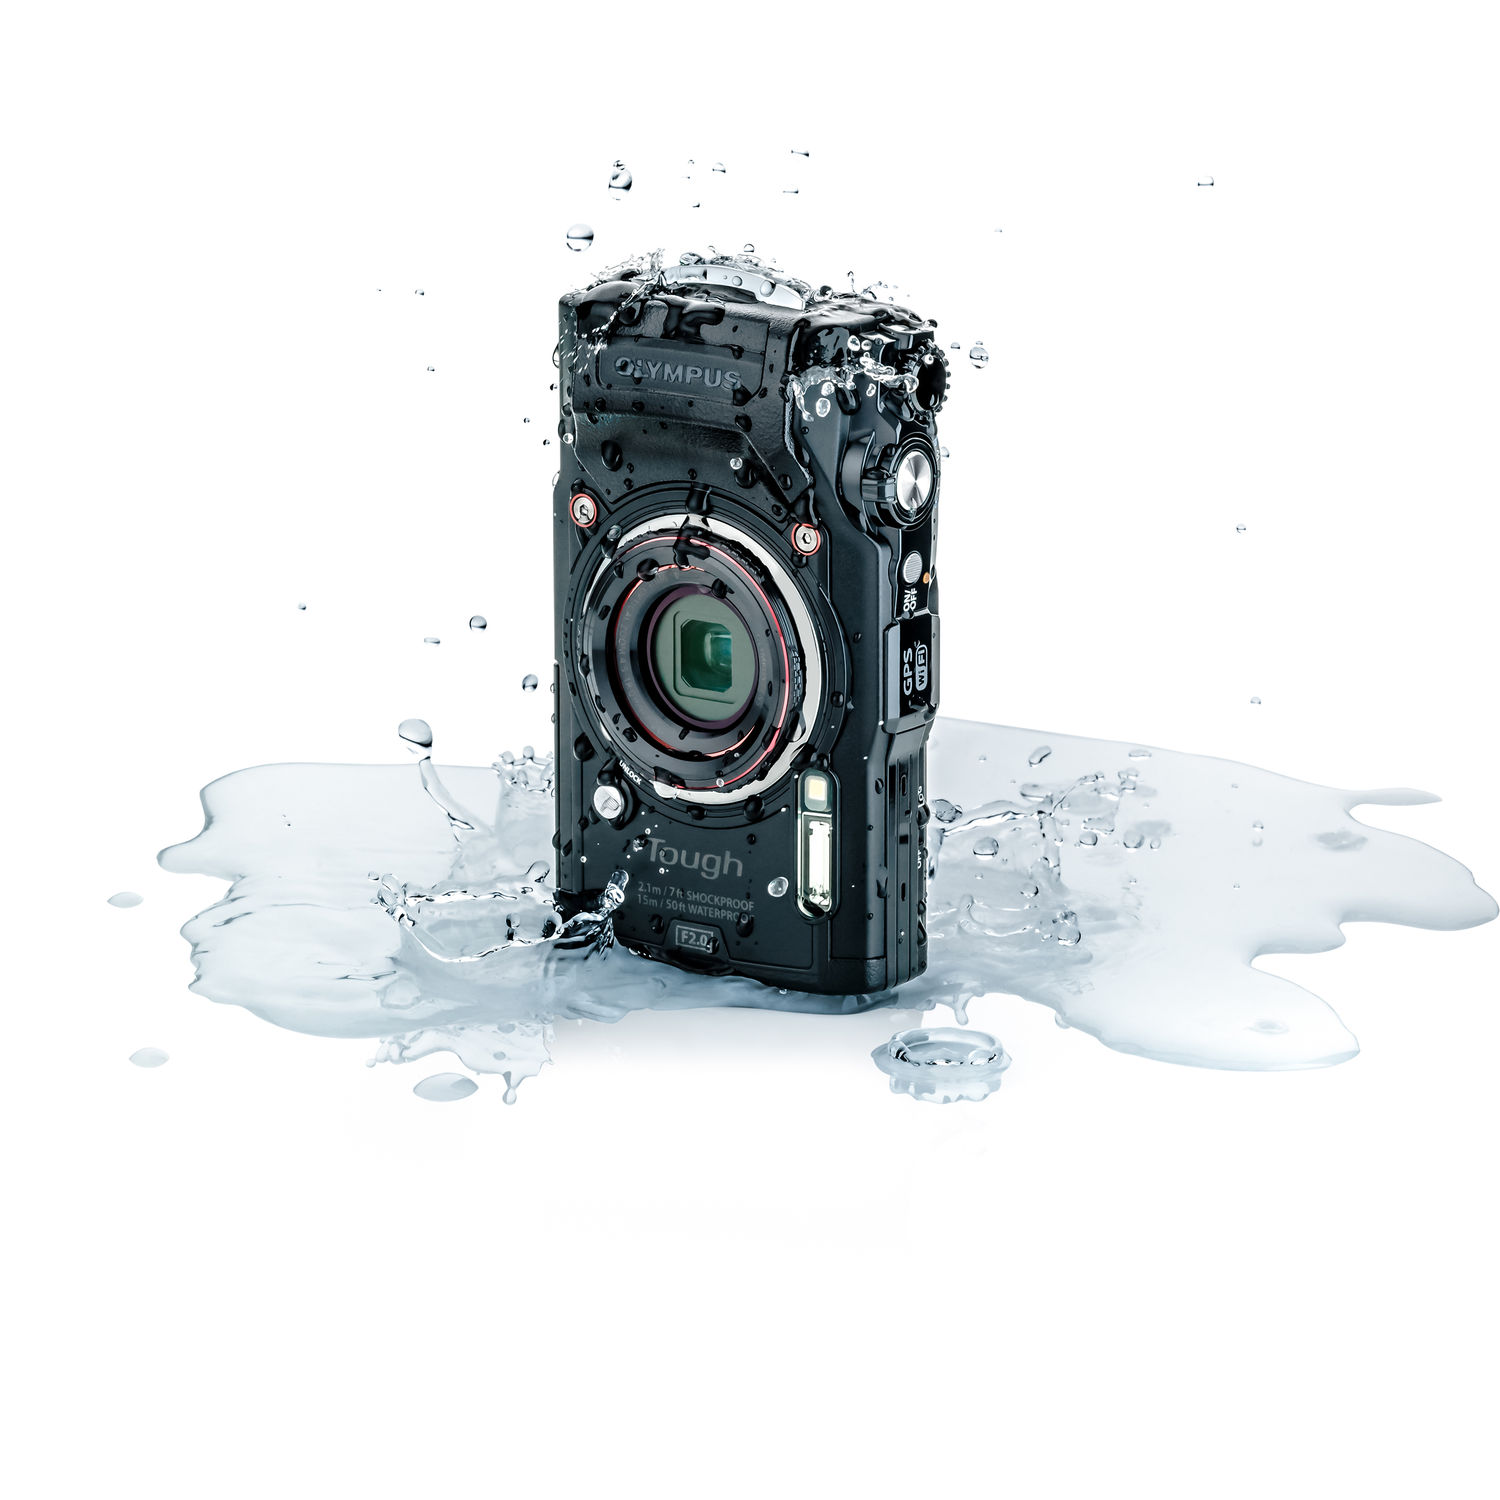 Olympus Tough TG-6 Waterproof Camera (Black) - Adventure Bundle - With 2 Extra Batteries + Float Strap + Sandisk 64GB Ultra Memory Card + Padded Case + Flex Tripod + Photo Software Suite + More - image 2 of 7